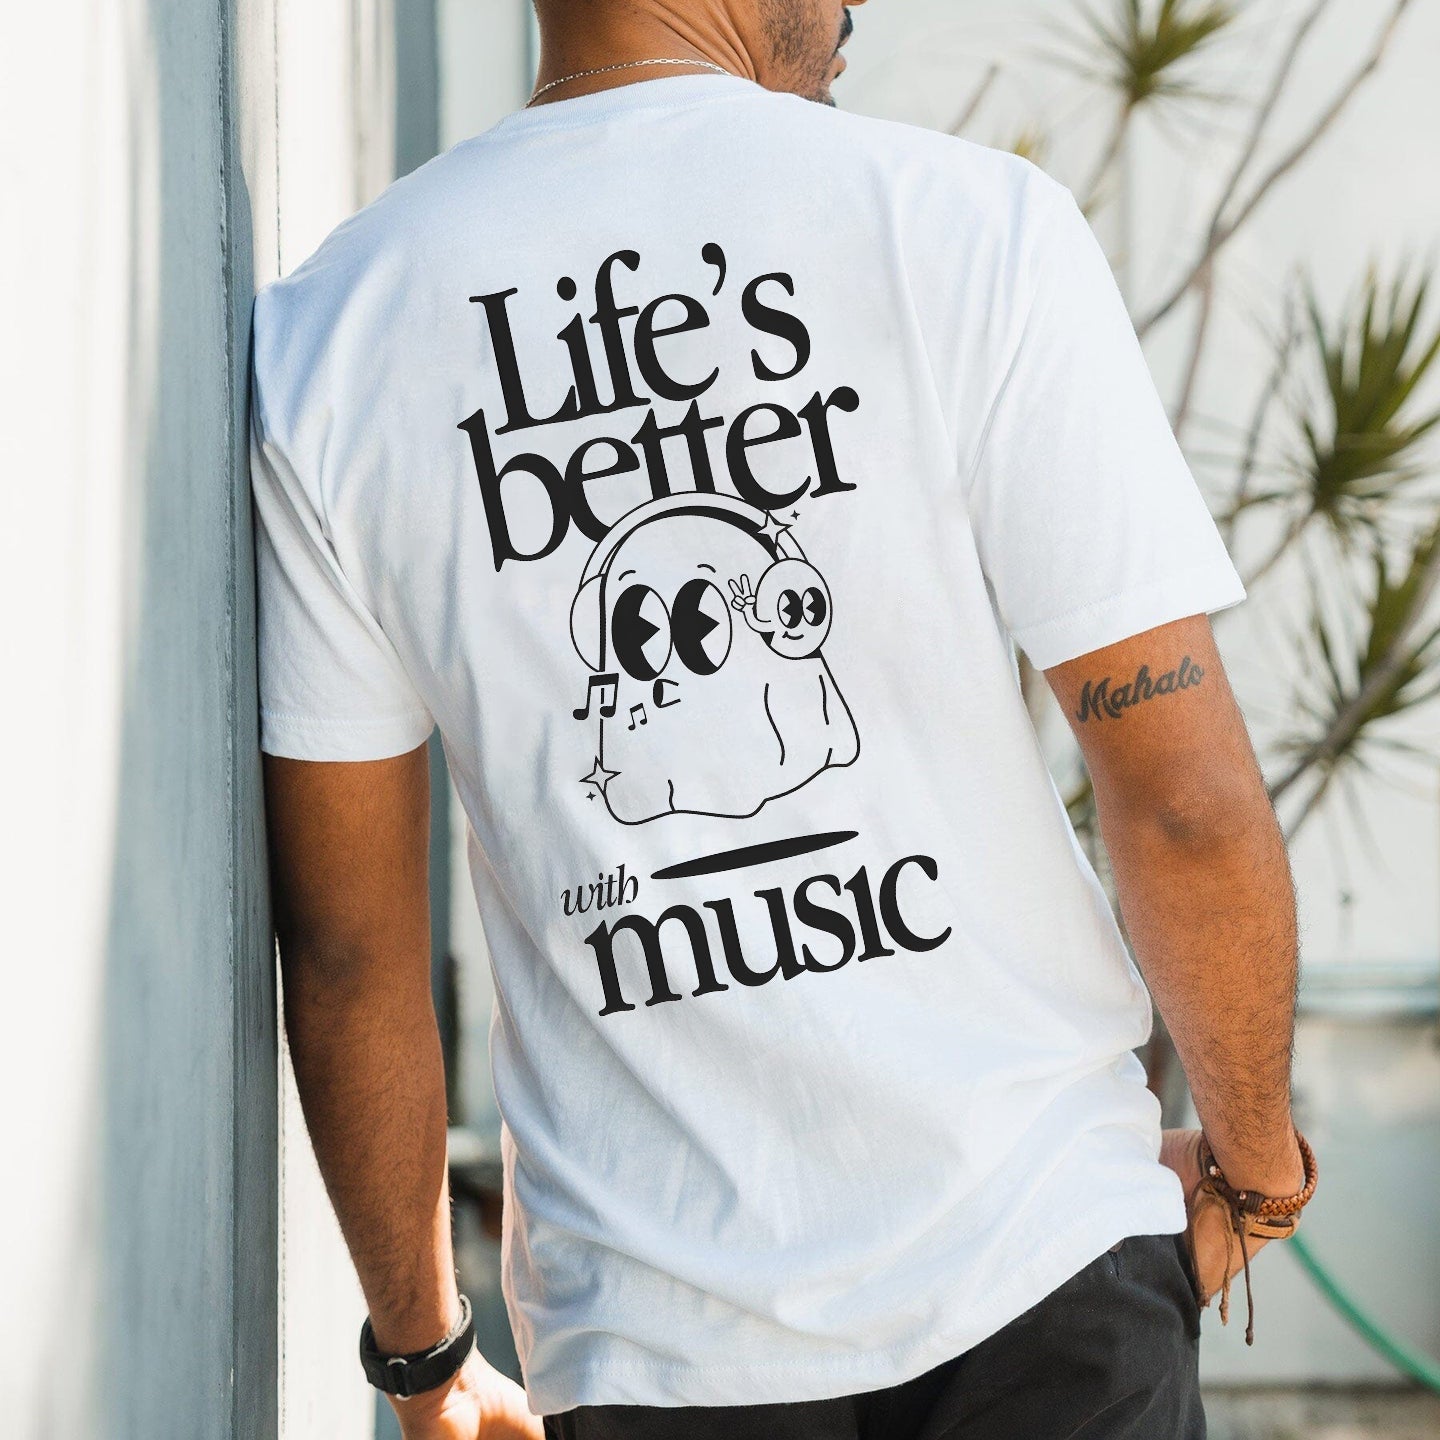 Life's Better With Music Men's Casual T-shirt 230g Big & Tall